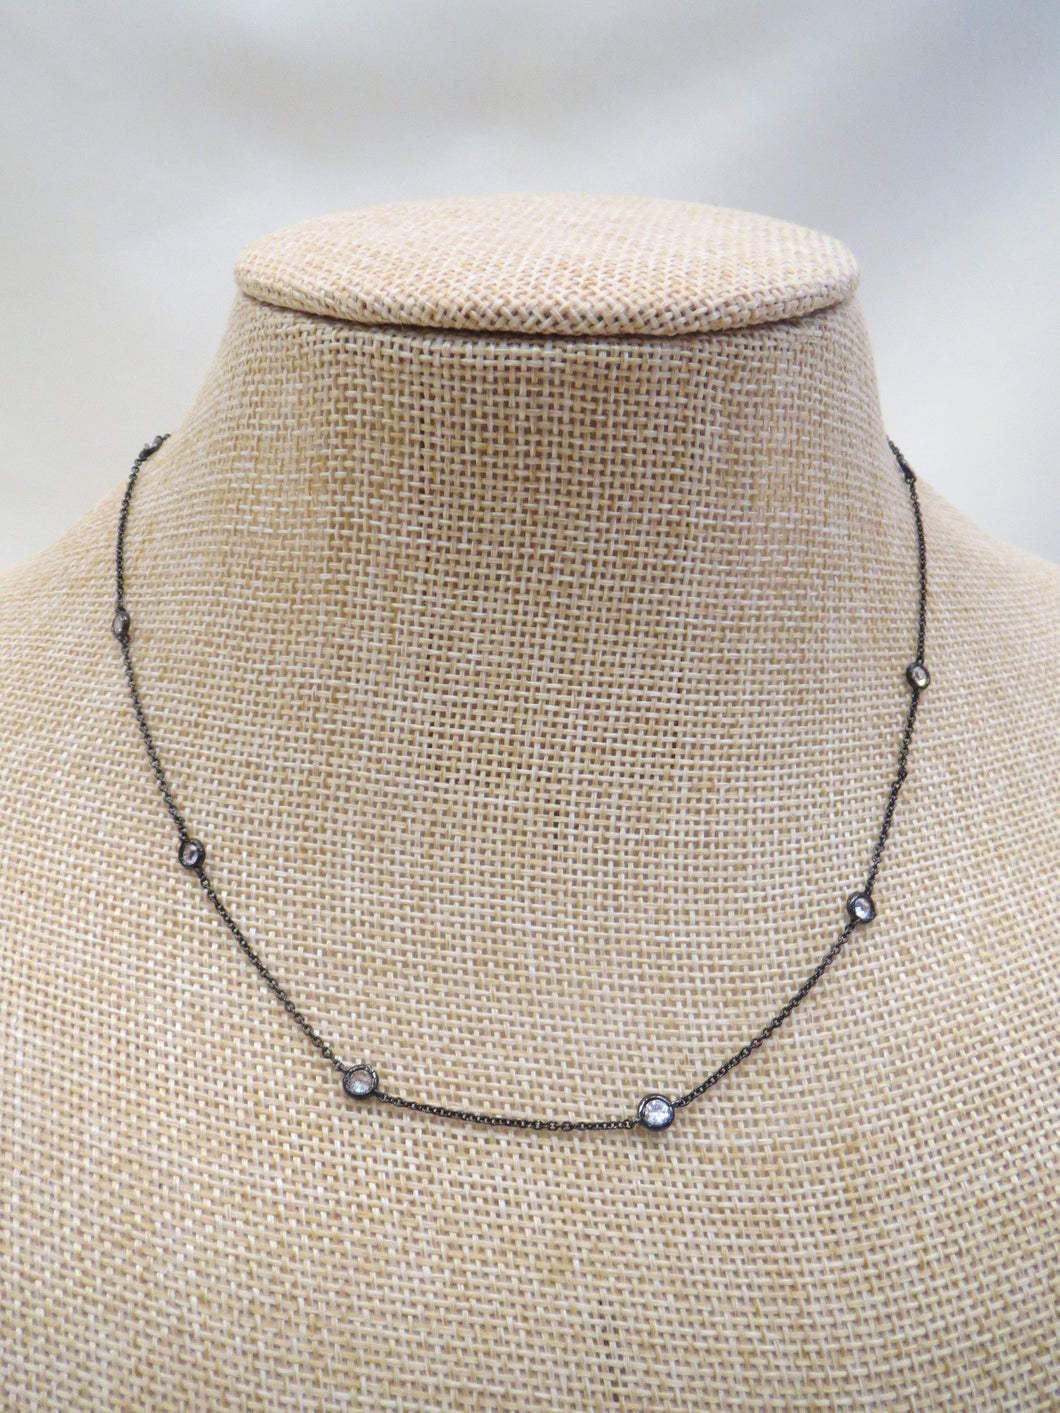 ADO | Dainty Black Chain necklace with Rhinestones - All Decd Out